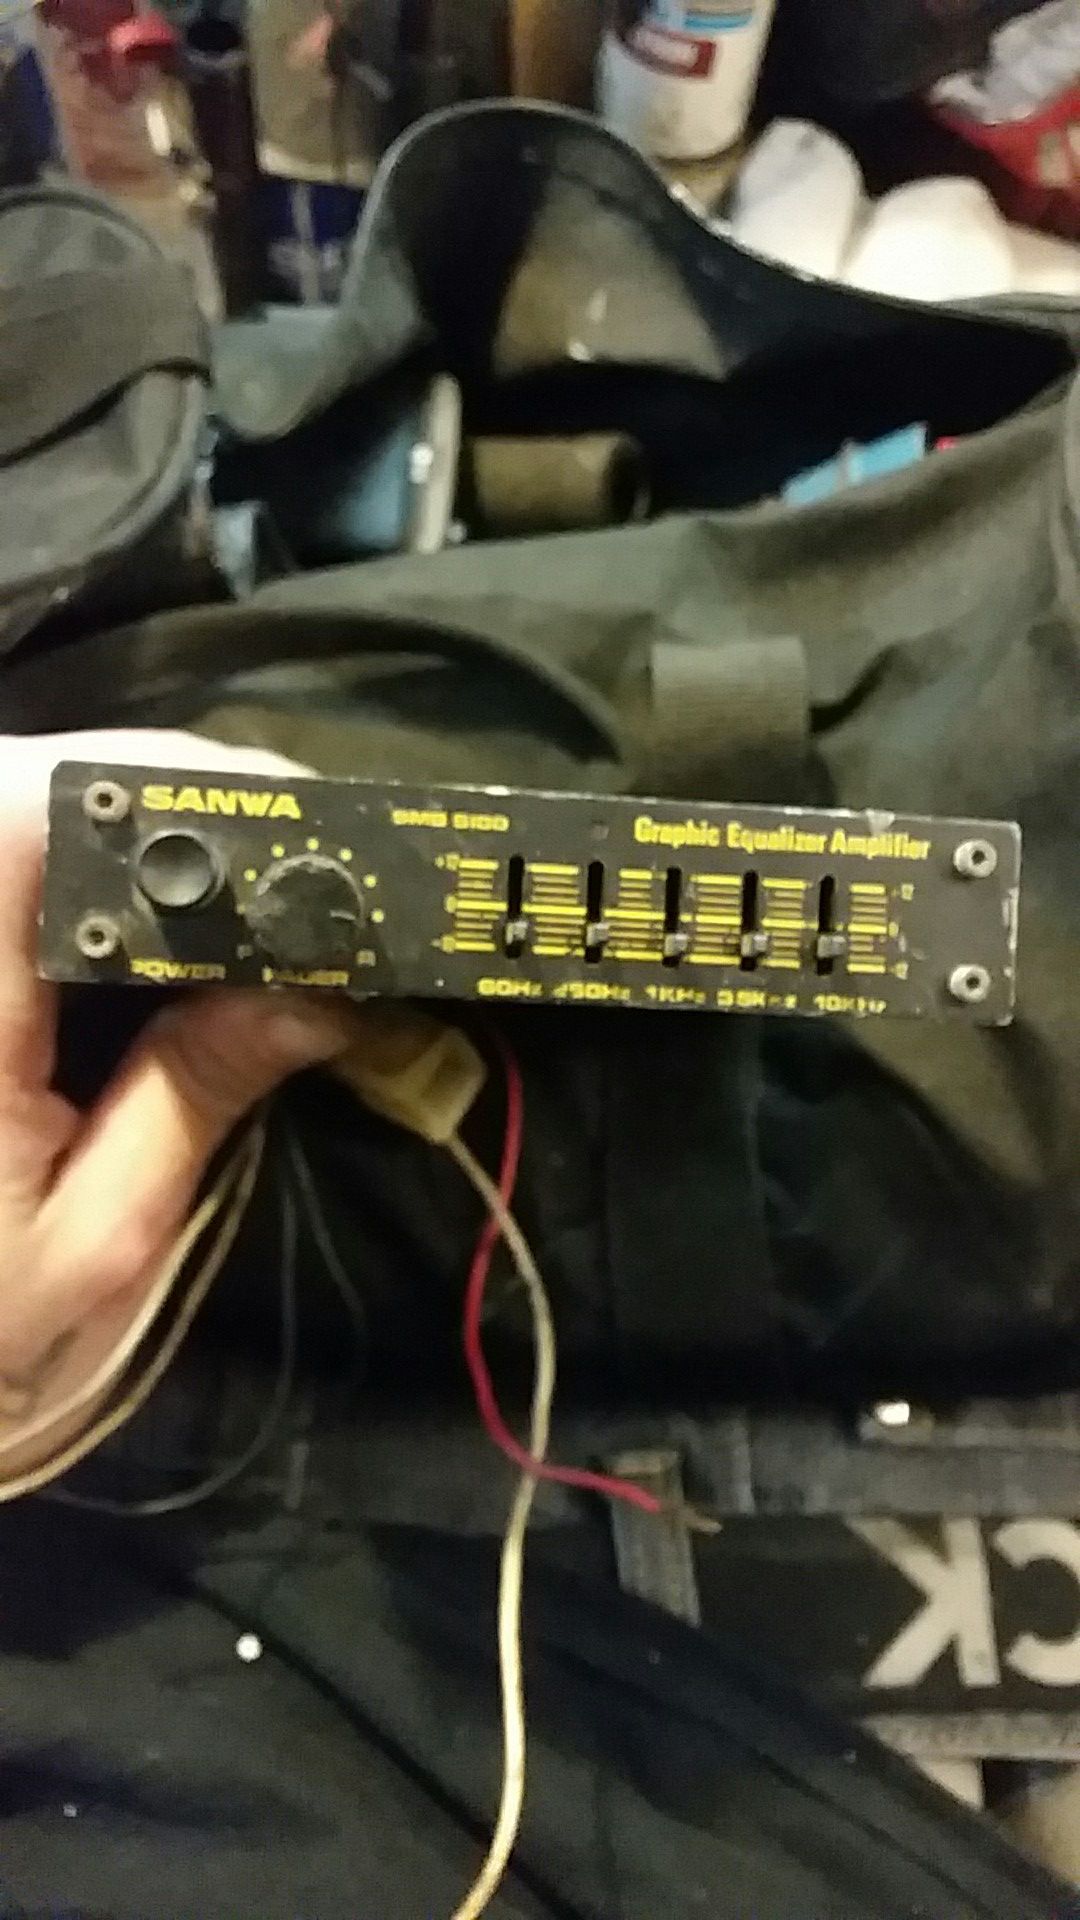 Sanwa graphic equalizer amplifier